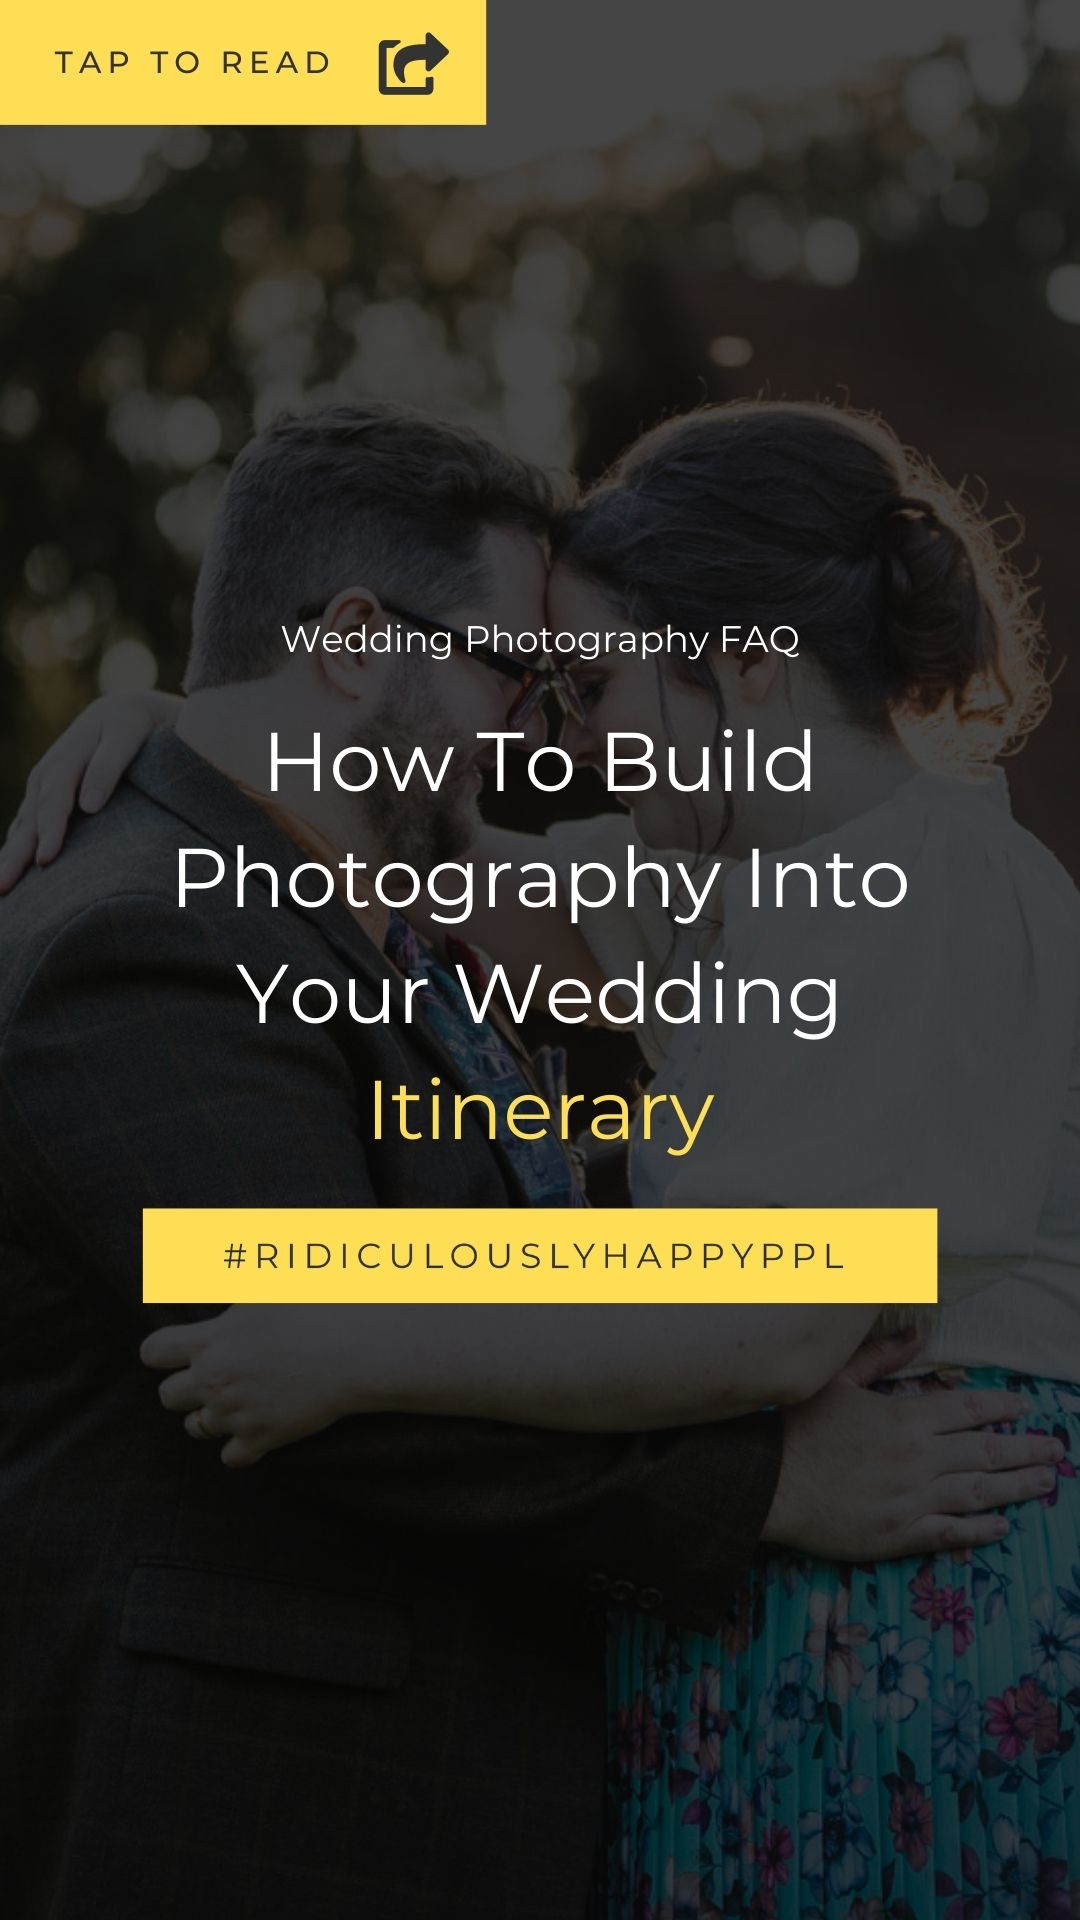 How Can We Create Our Ideal Wedding Photography Itinerary?